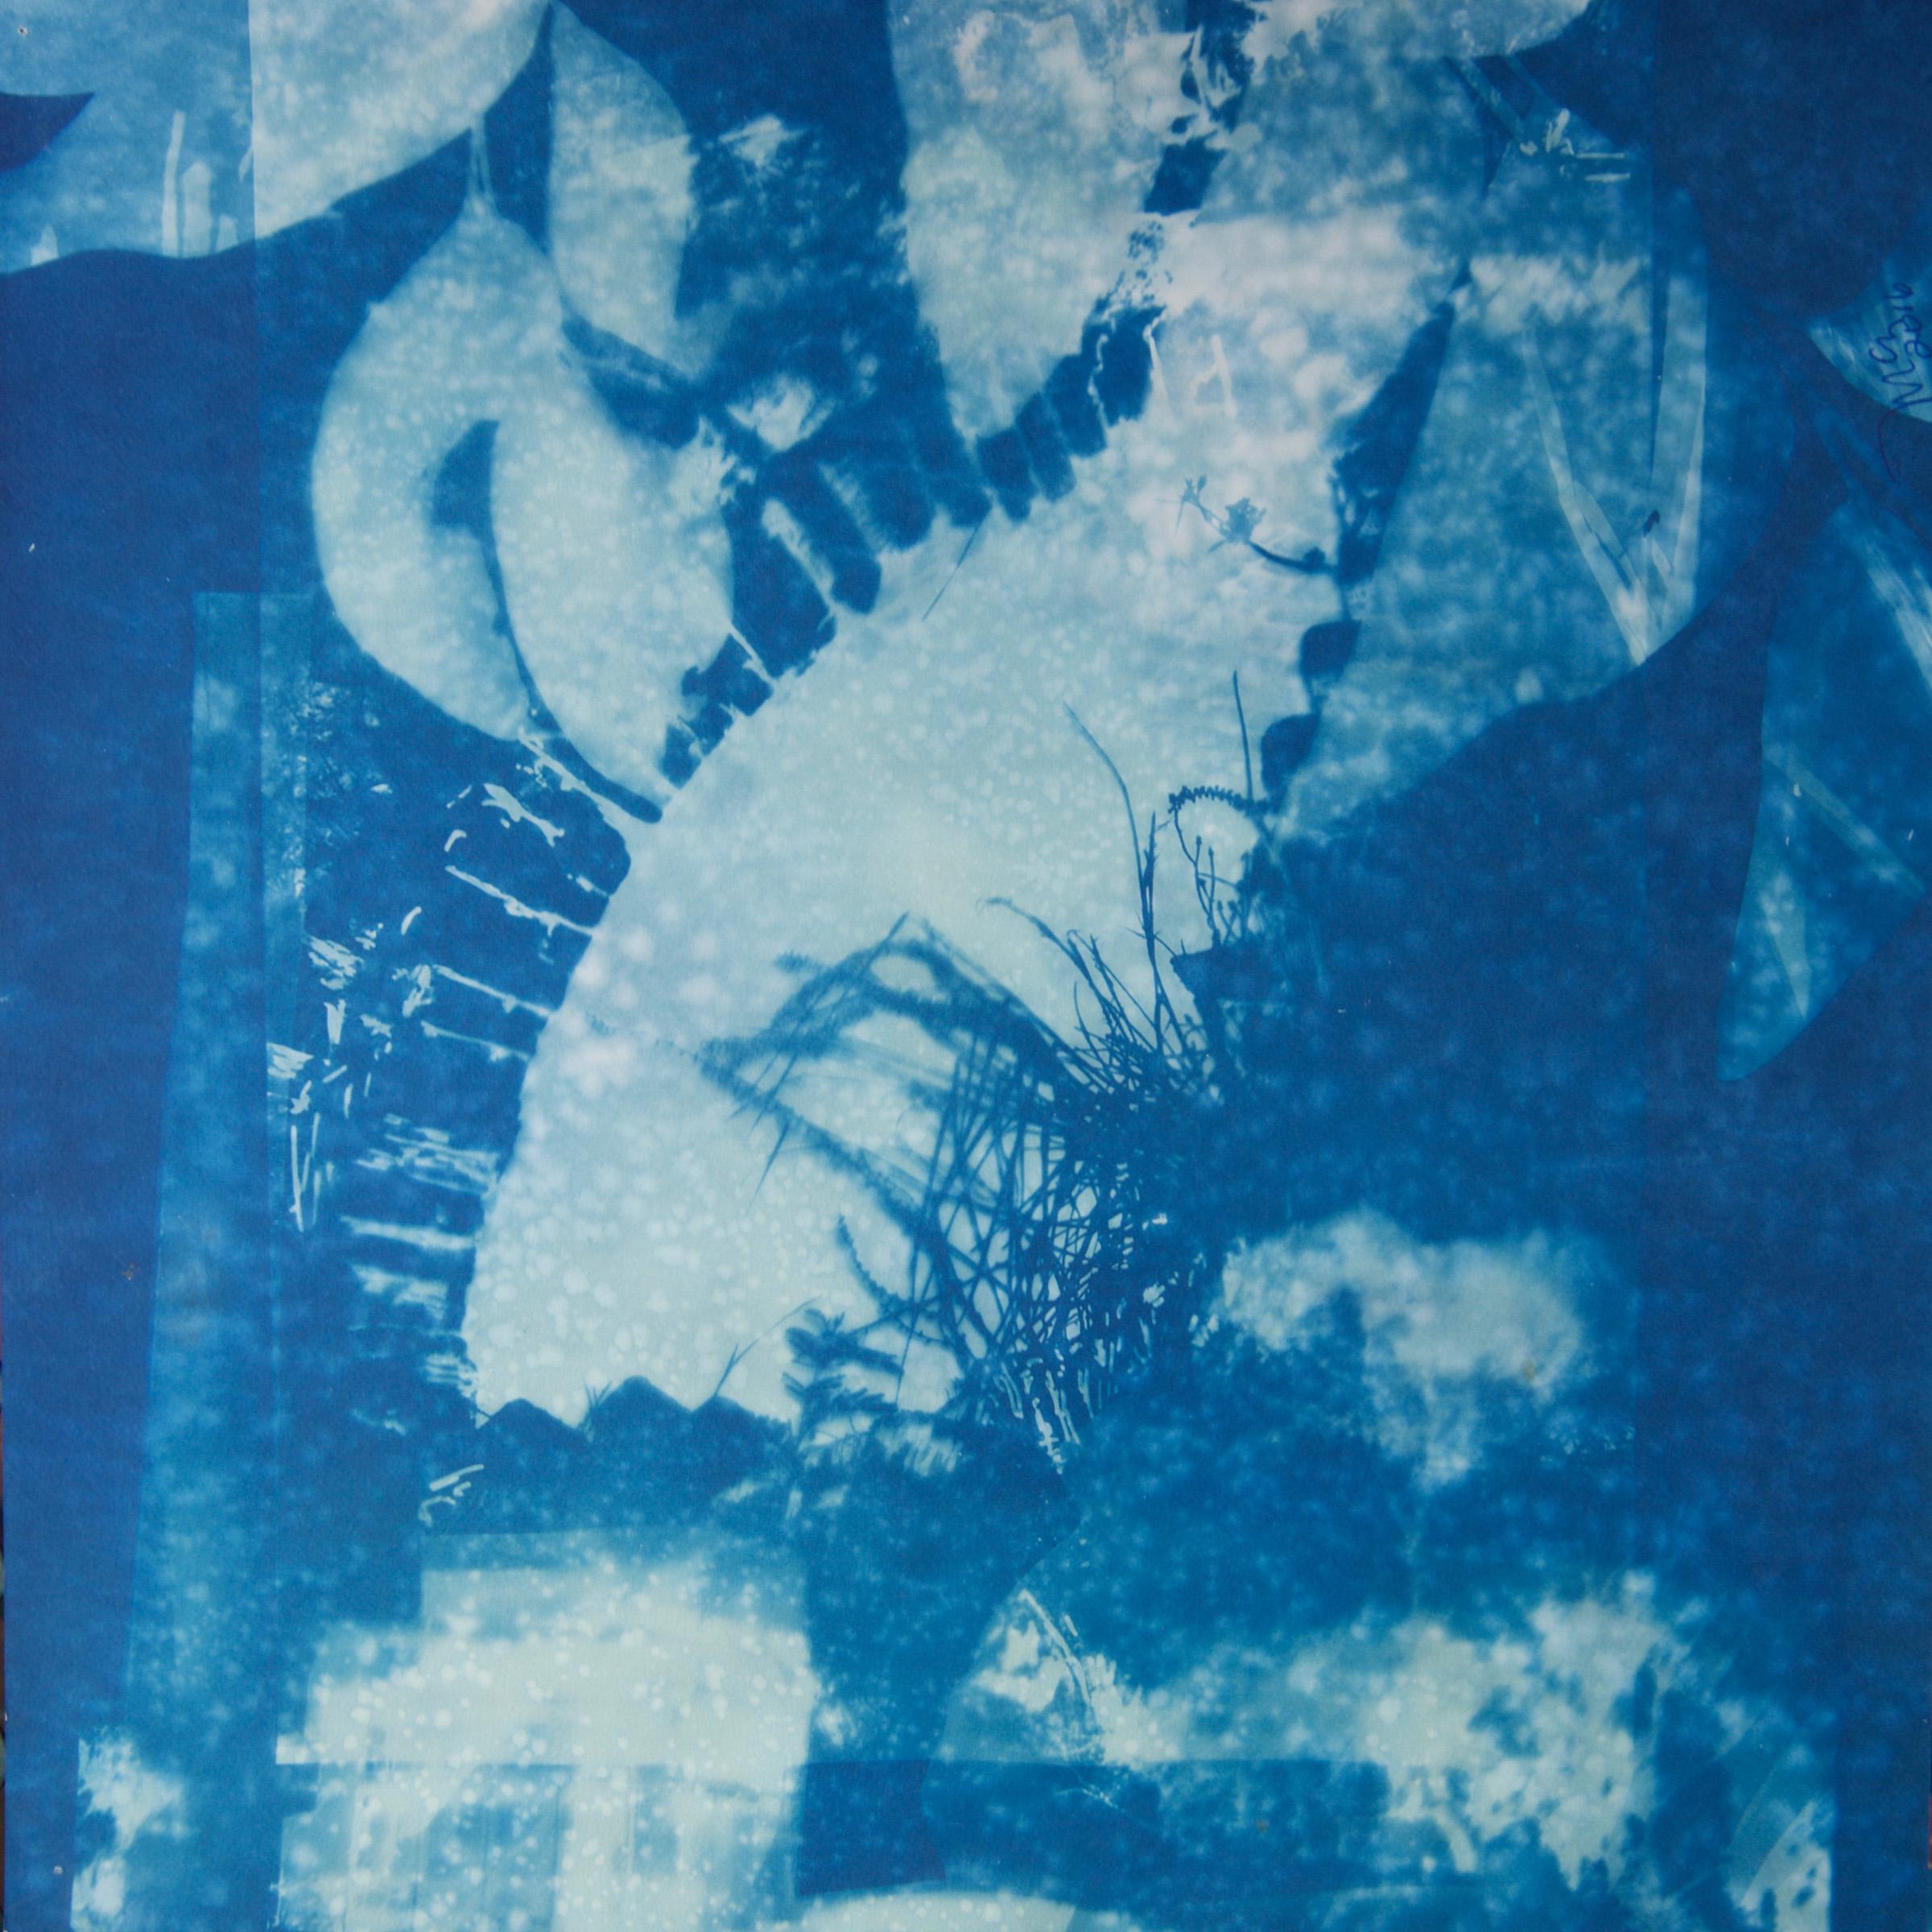 "Newnes Oven 3", contemporary, leaves, blue, cyanotype, photograph - Photograph by Marie Craig